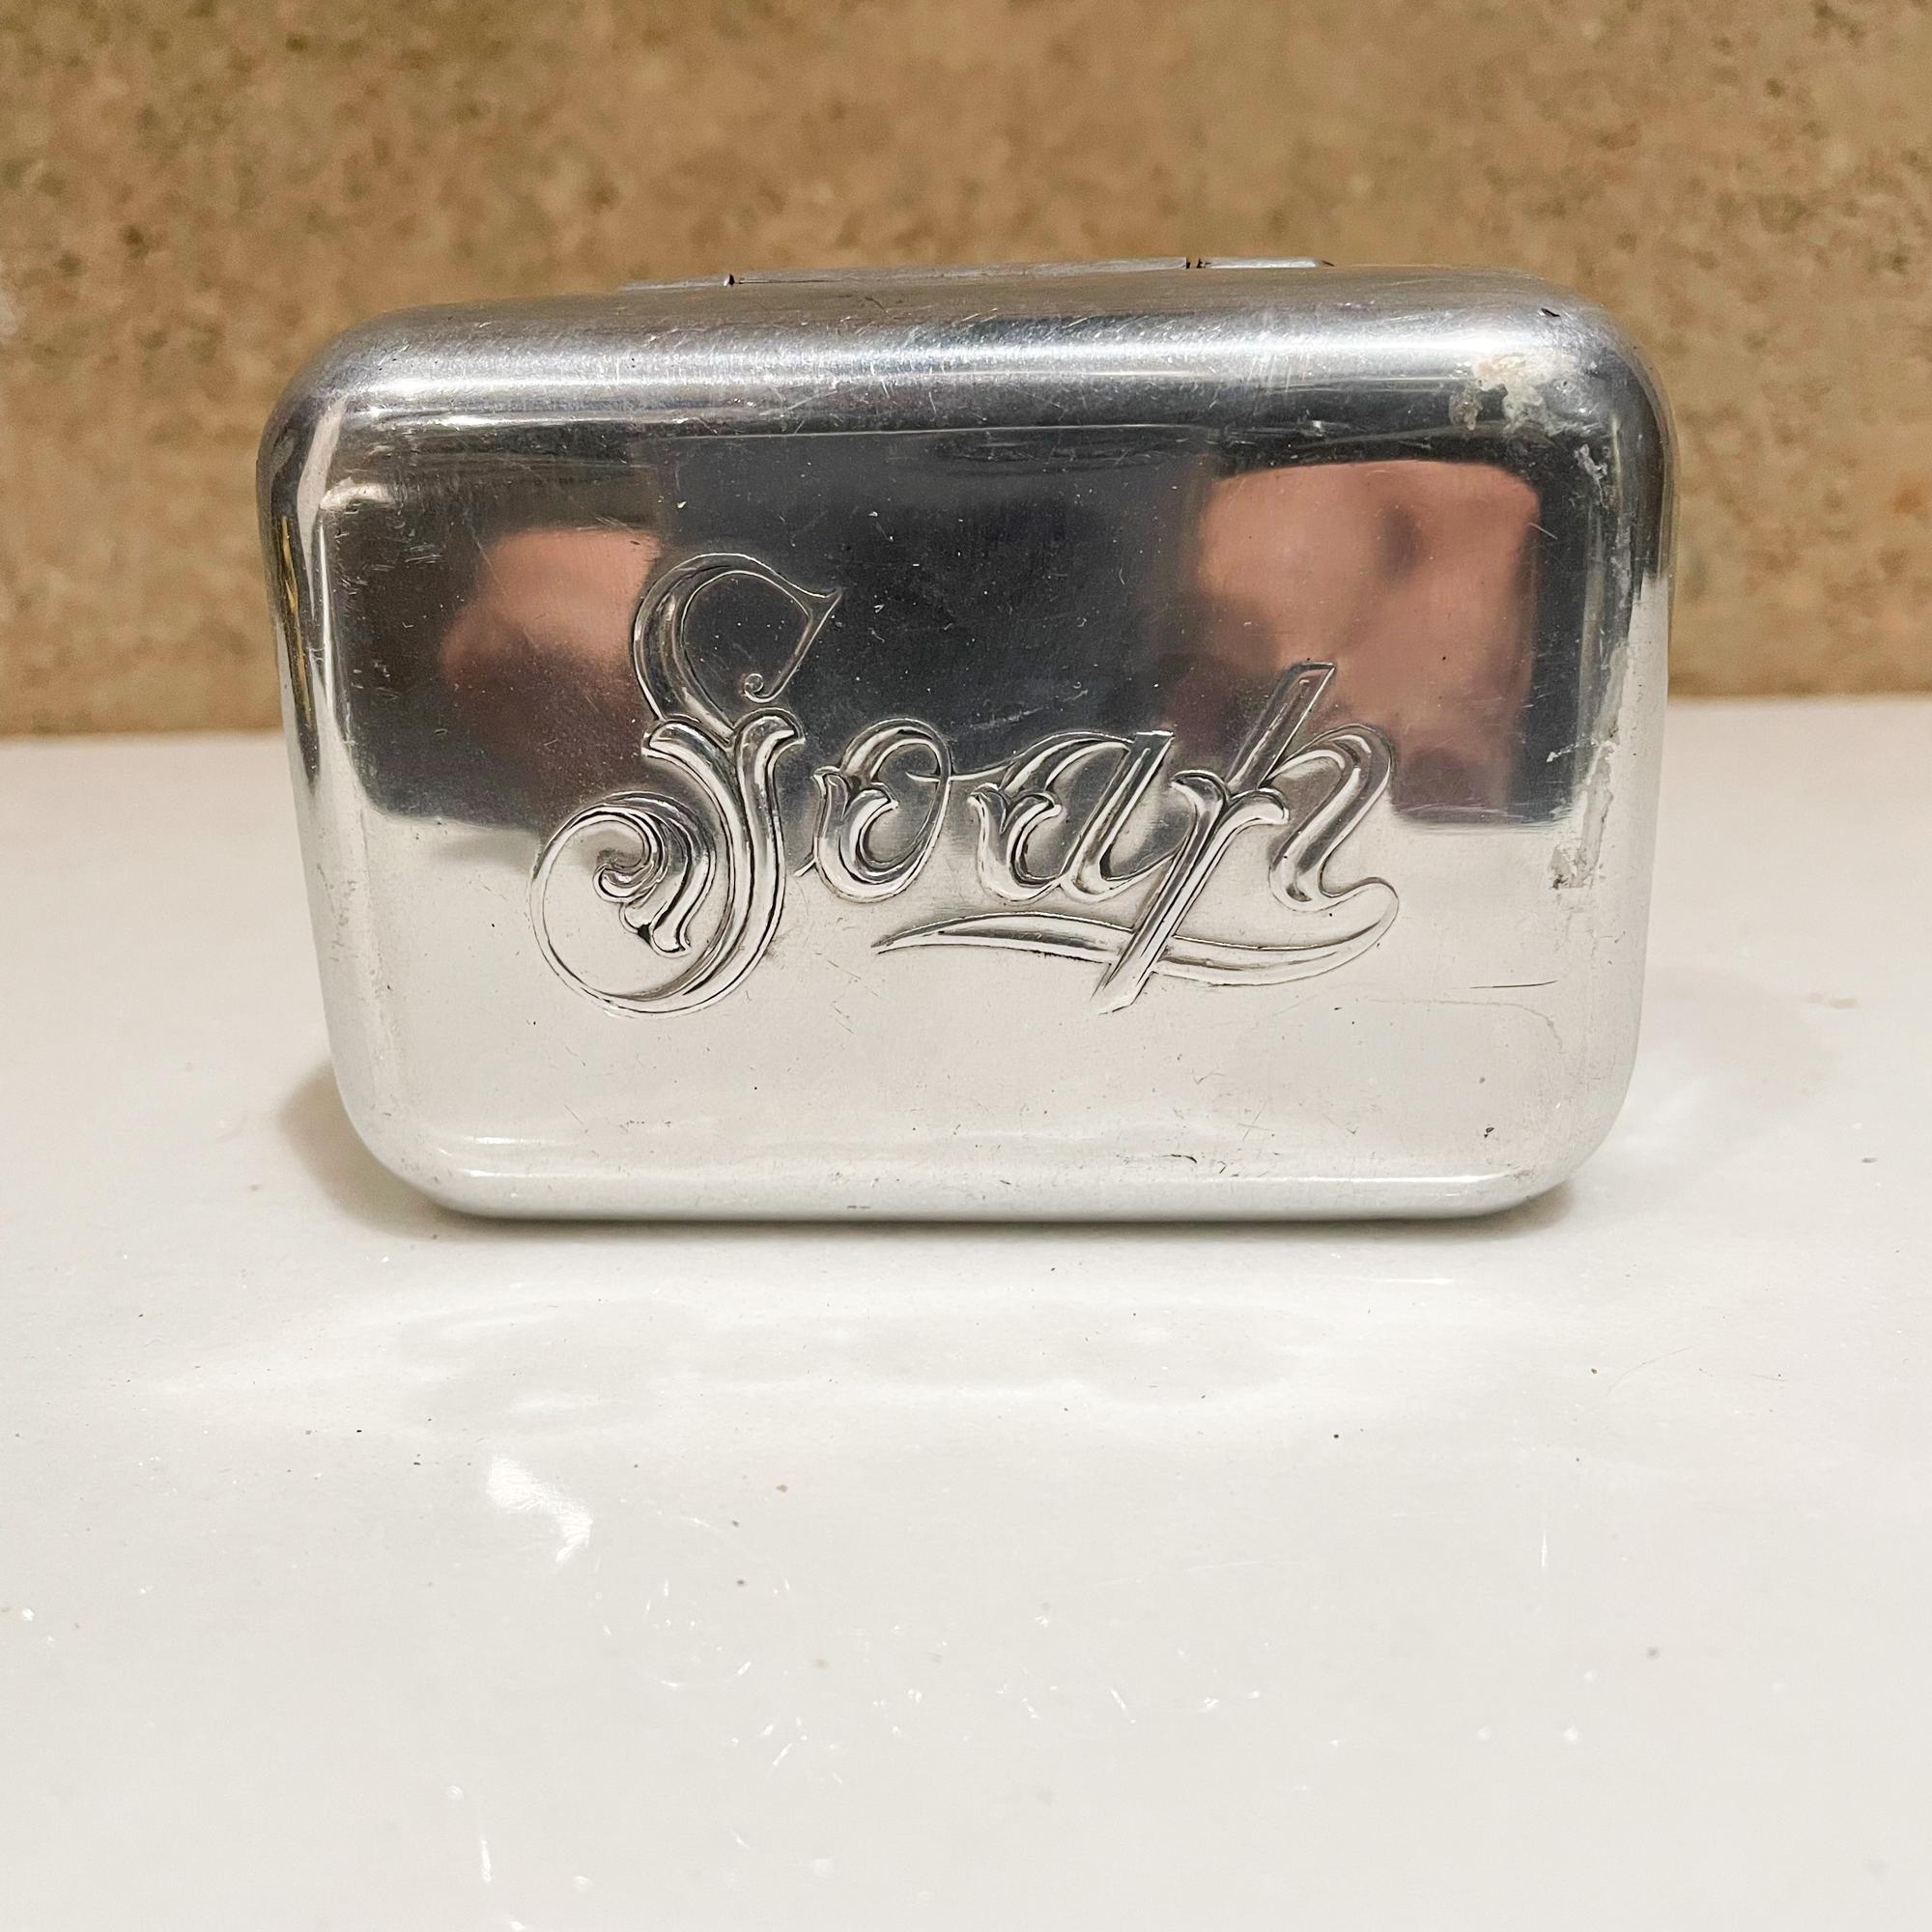 Soap travel case
Vintage aluminum covered soap carry dish travel soap box airstream era
Dimensions: 3.63 x 2.63 D x 1.38 H inches
Vintage item with preowned wear and use. Unrestored vintage.
Refer to images
Free shipping in the US.

